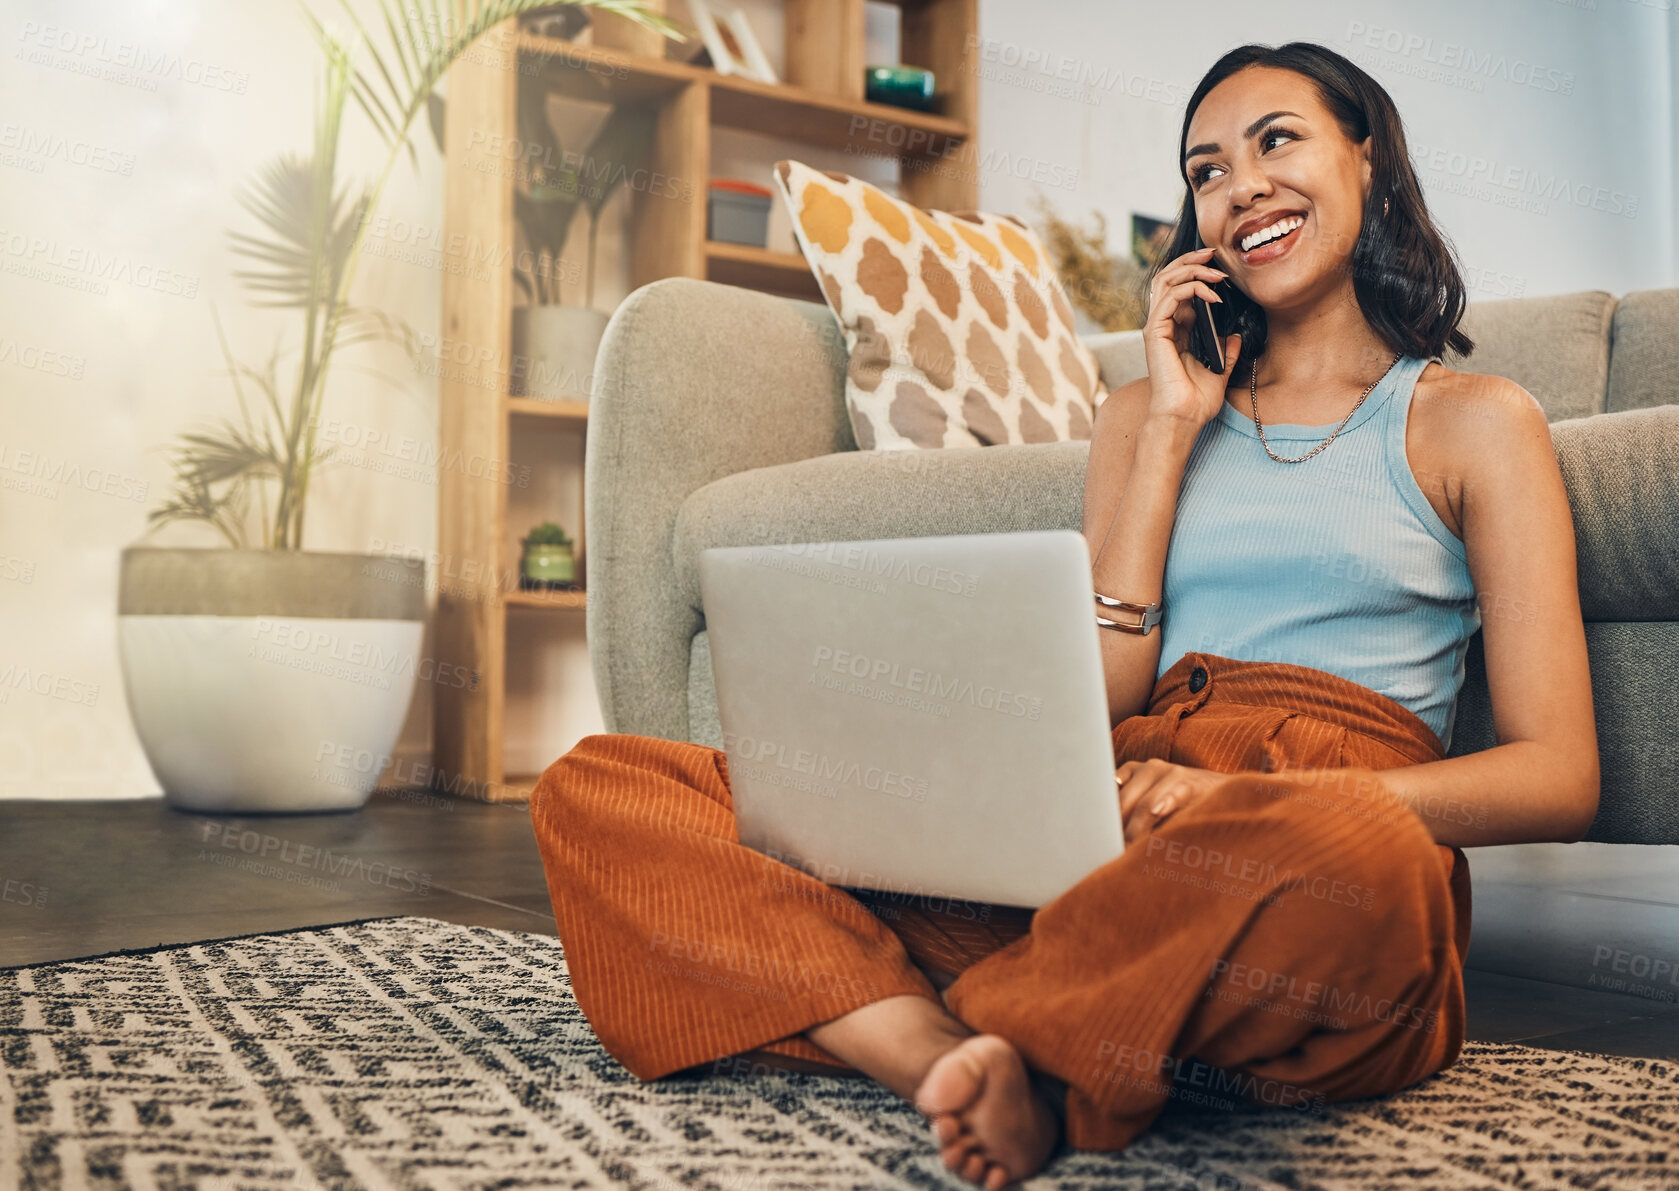 Buy stock photo .Beautiful mixed race woman using blogging laptop and cellphone to talk to clients in home living room. Hispanic entrepreneur sitting cross legged alone on lounge floor and networking on technology